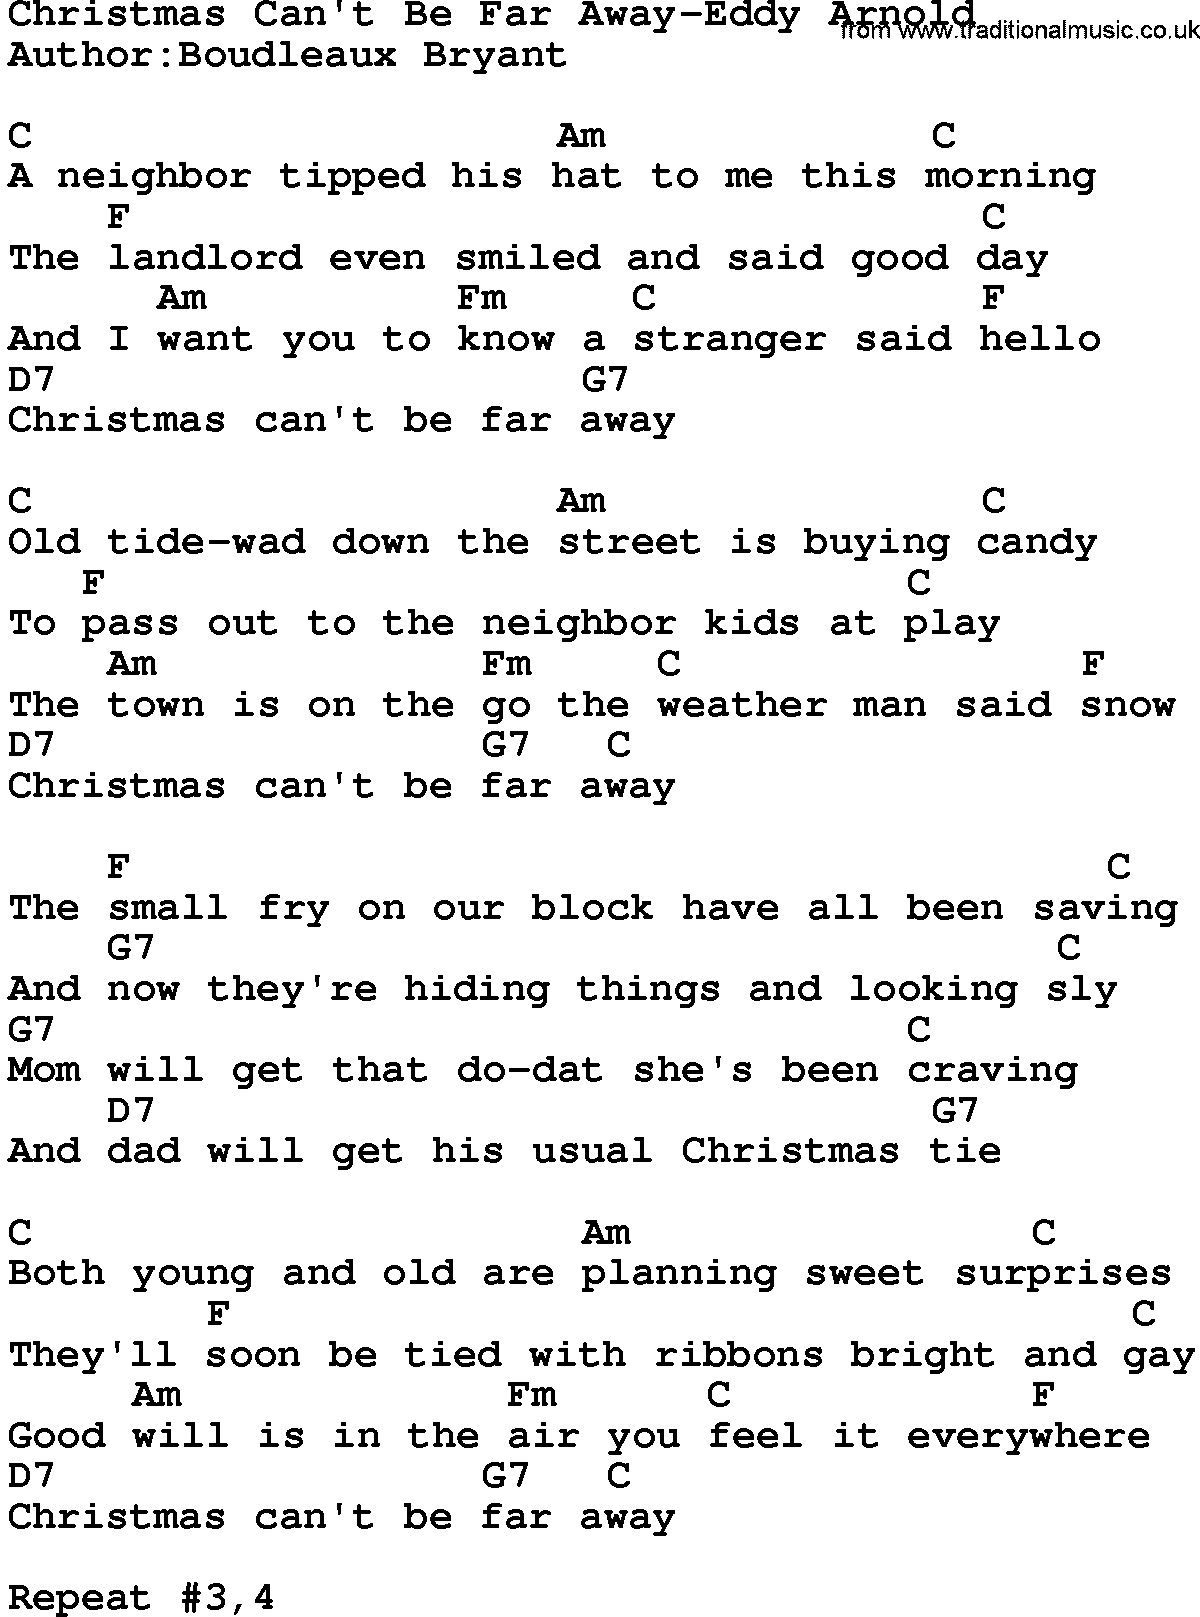 Country music song: Christmas Can't Be Far Away-Eddy Arnold lyrics and chords